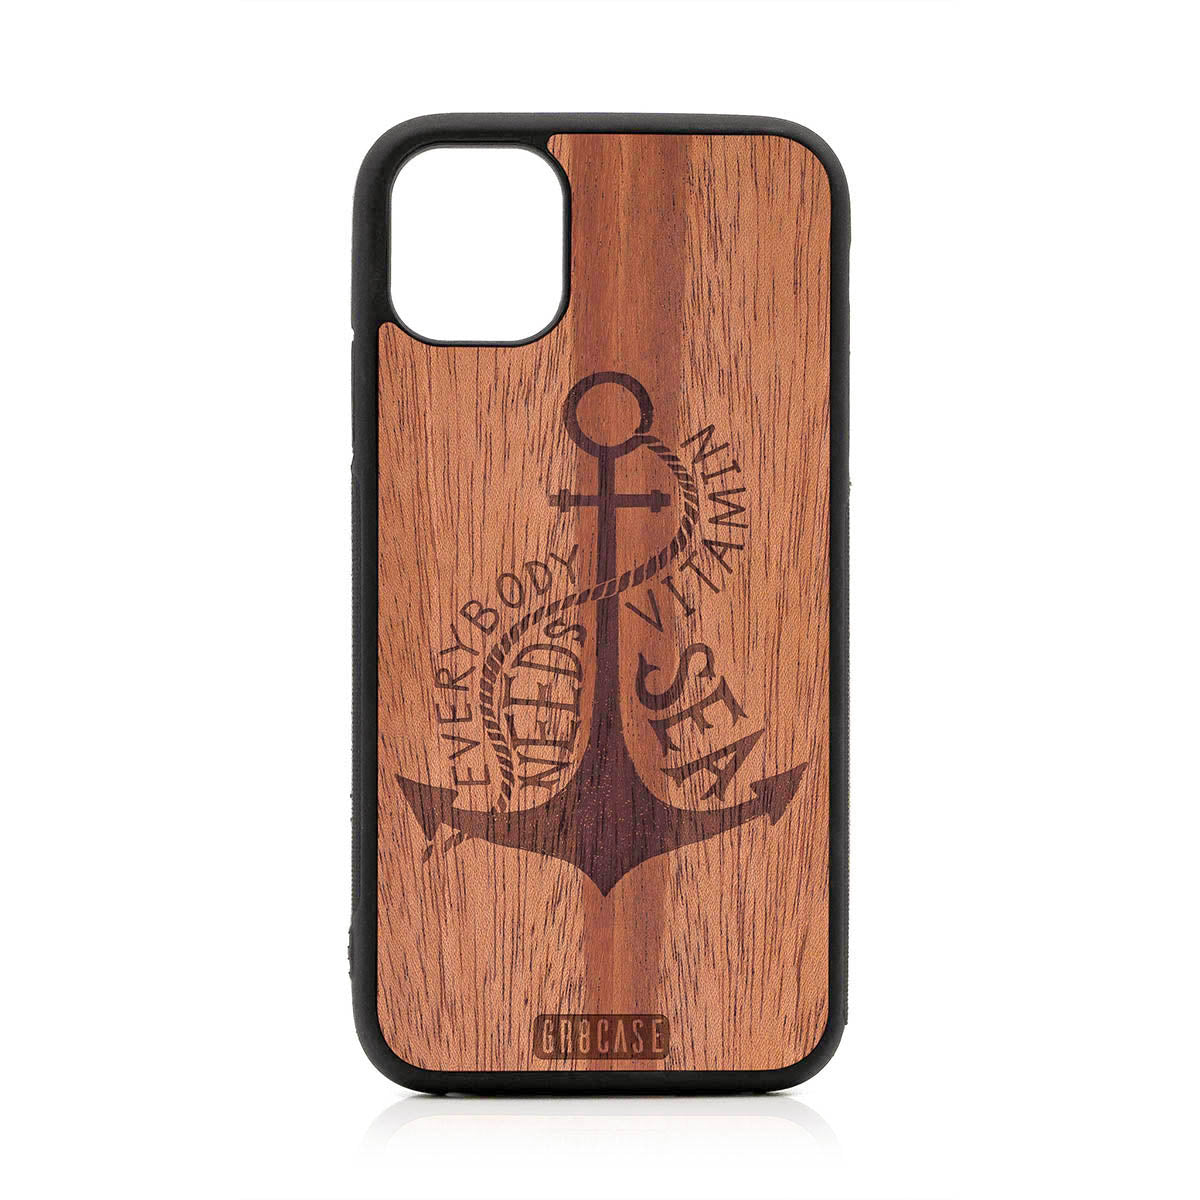 Everybody Needs Vitamin Sea (Anchor) Design Wood Case For iPhone 11 by GR8CASE